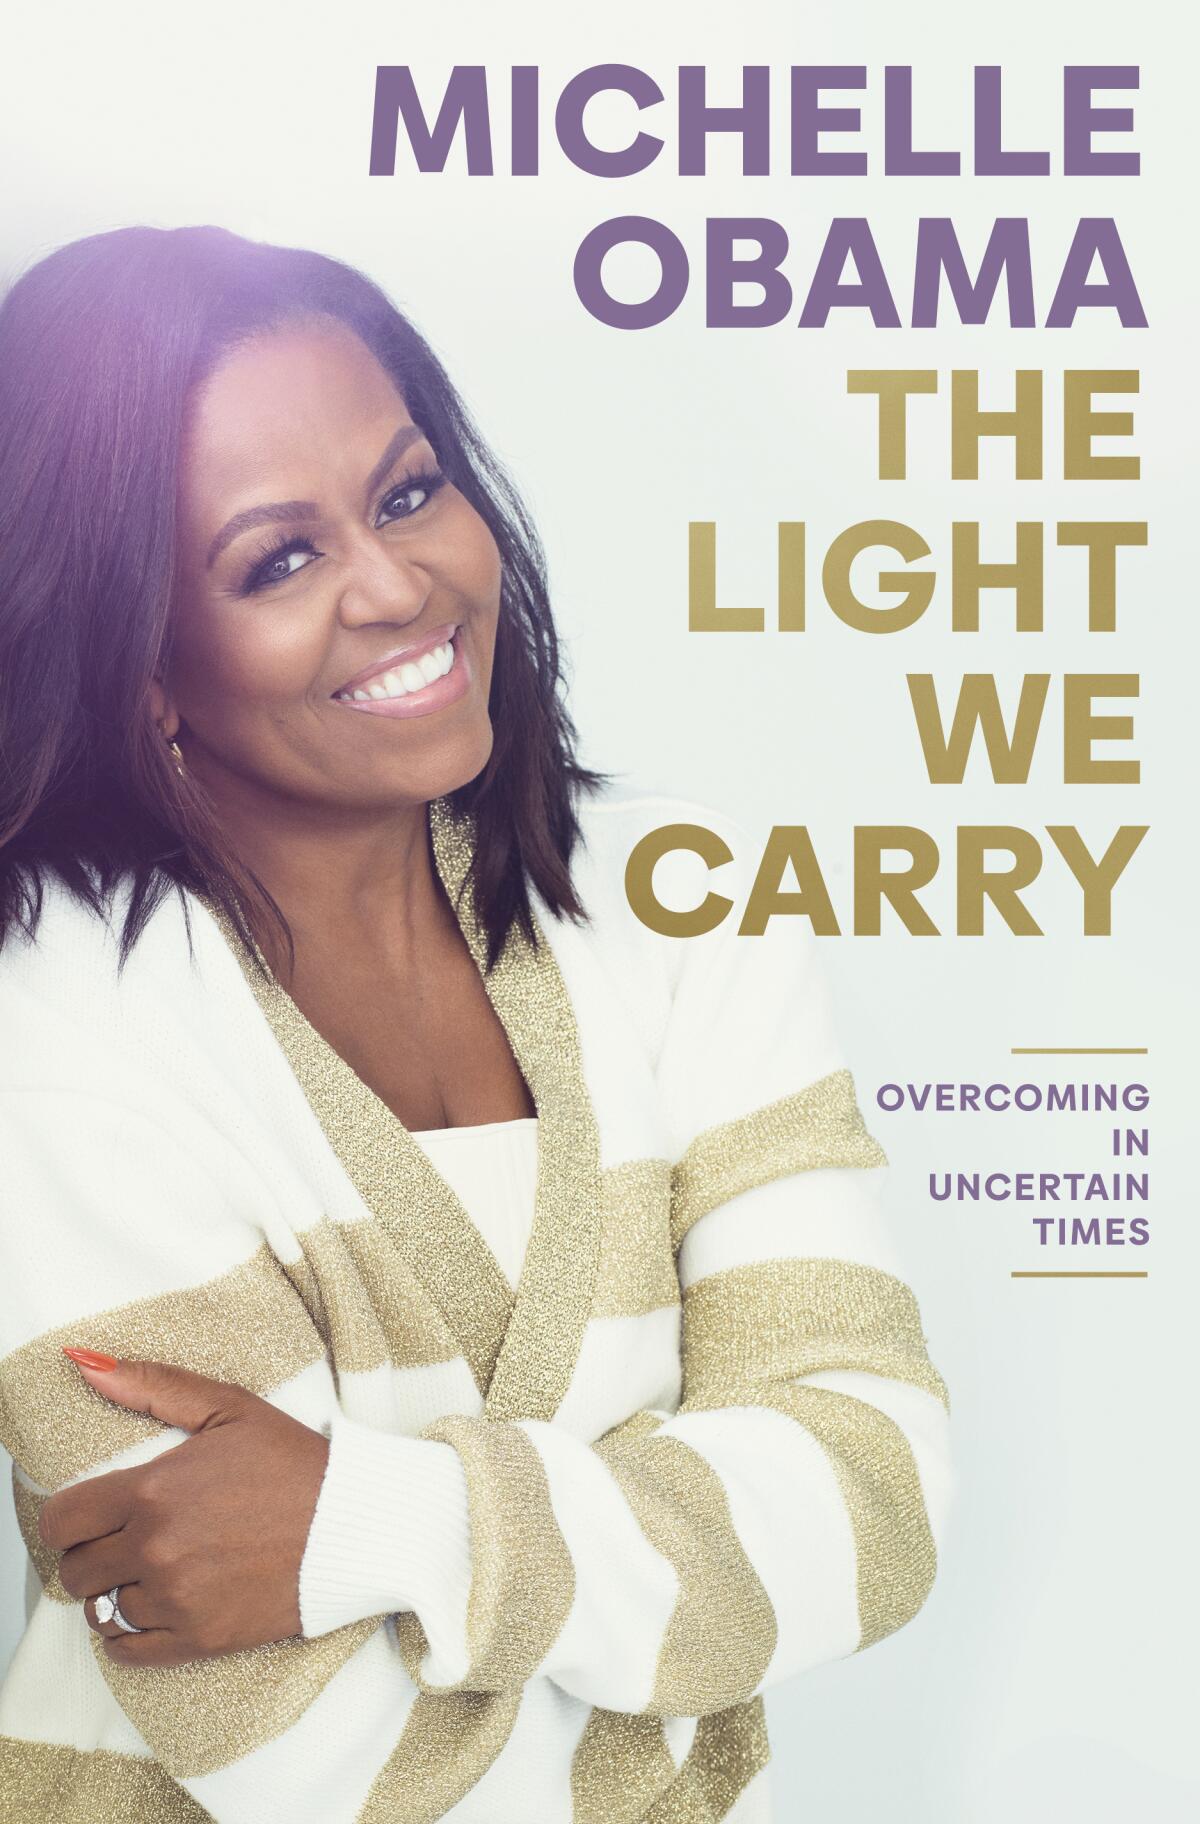 "The Light We Carry," by Michelle Obama